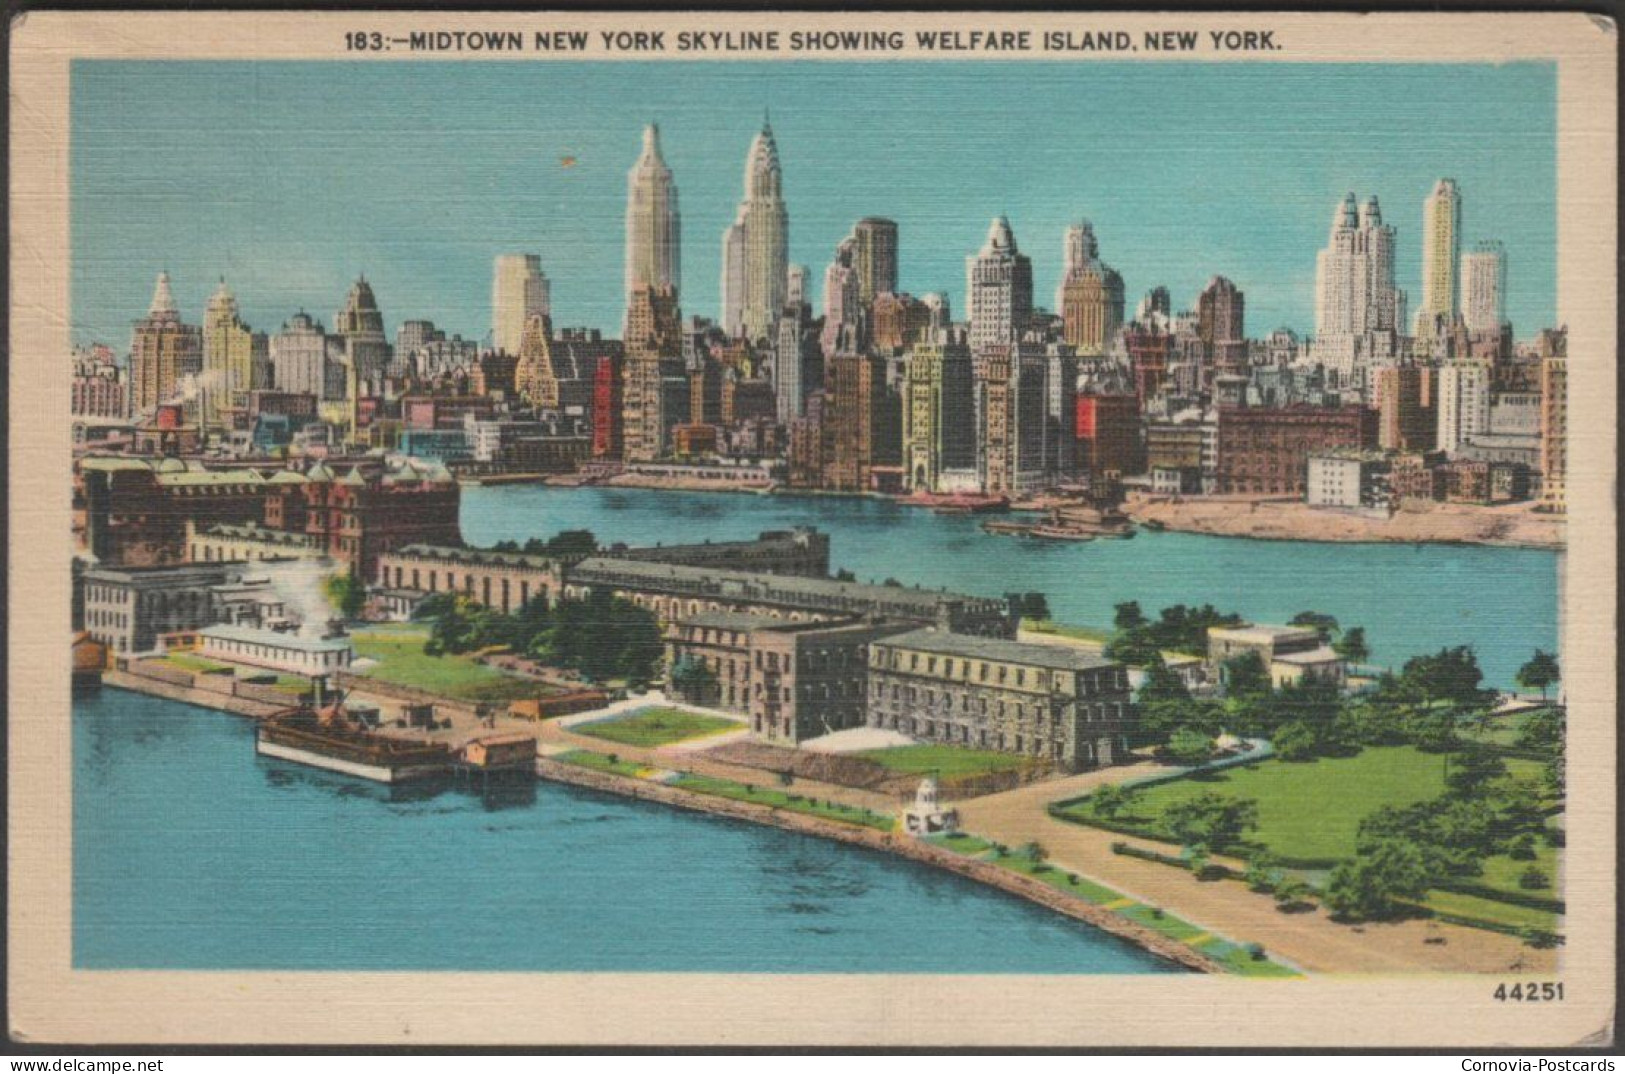 Midtown New York Skyline Showing Welfare Island, New York, 1942 - Manhattan PCP Co Postcard - Multi-vues, Vues Panoramiques